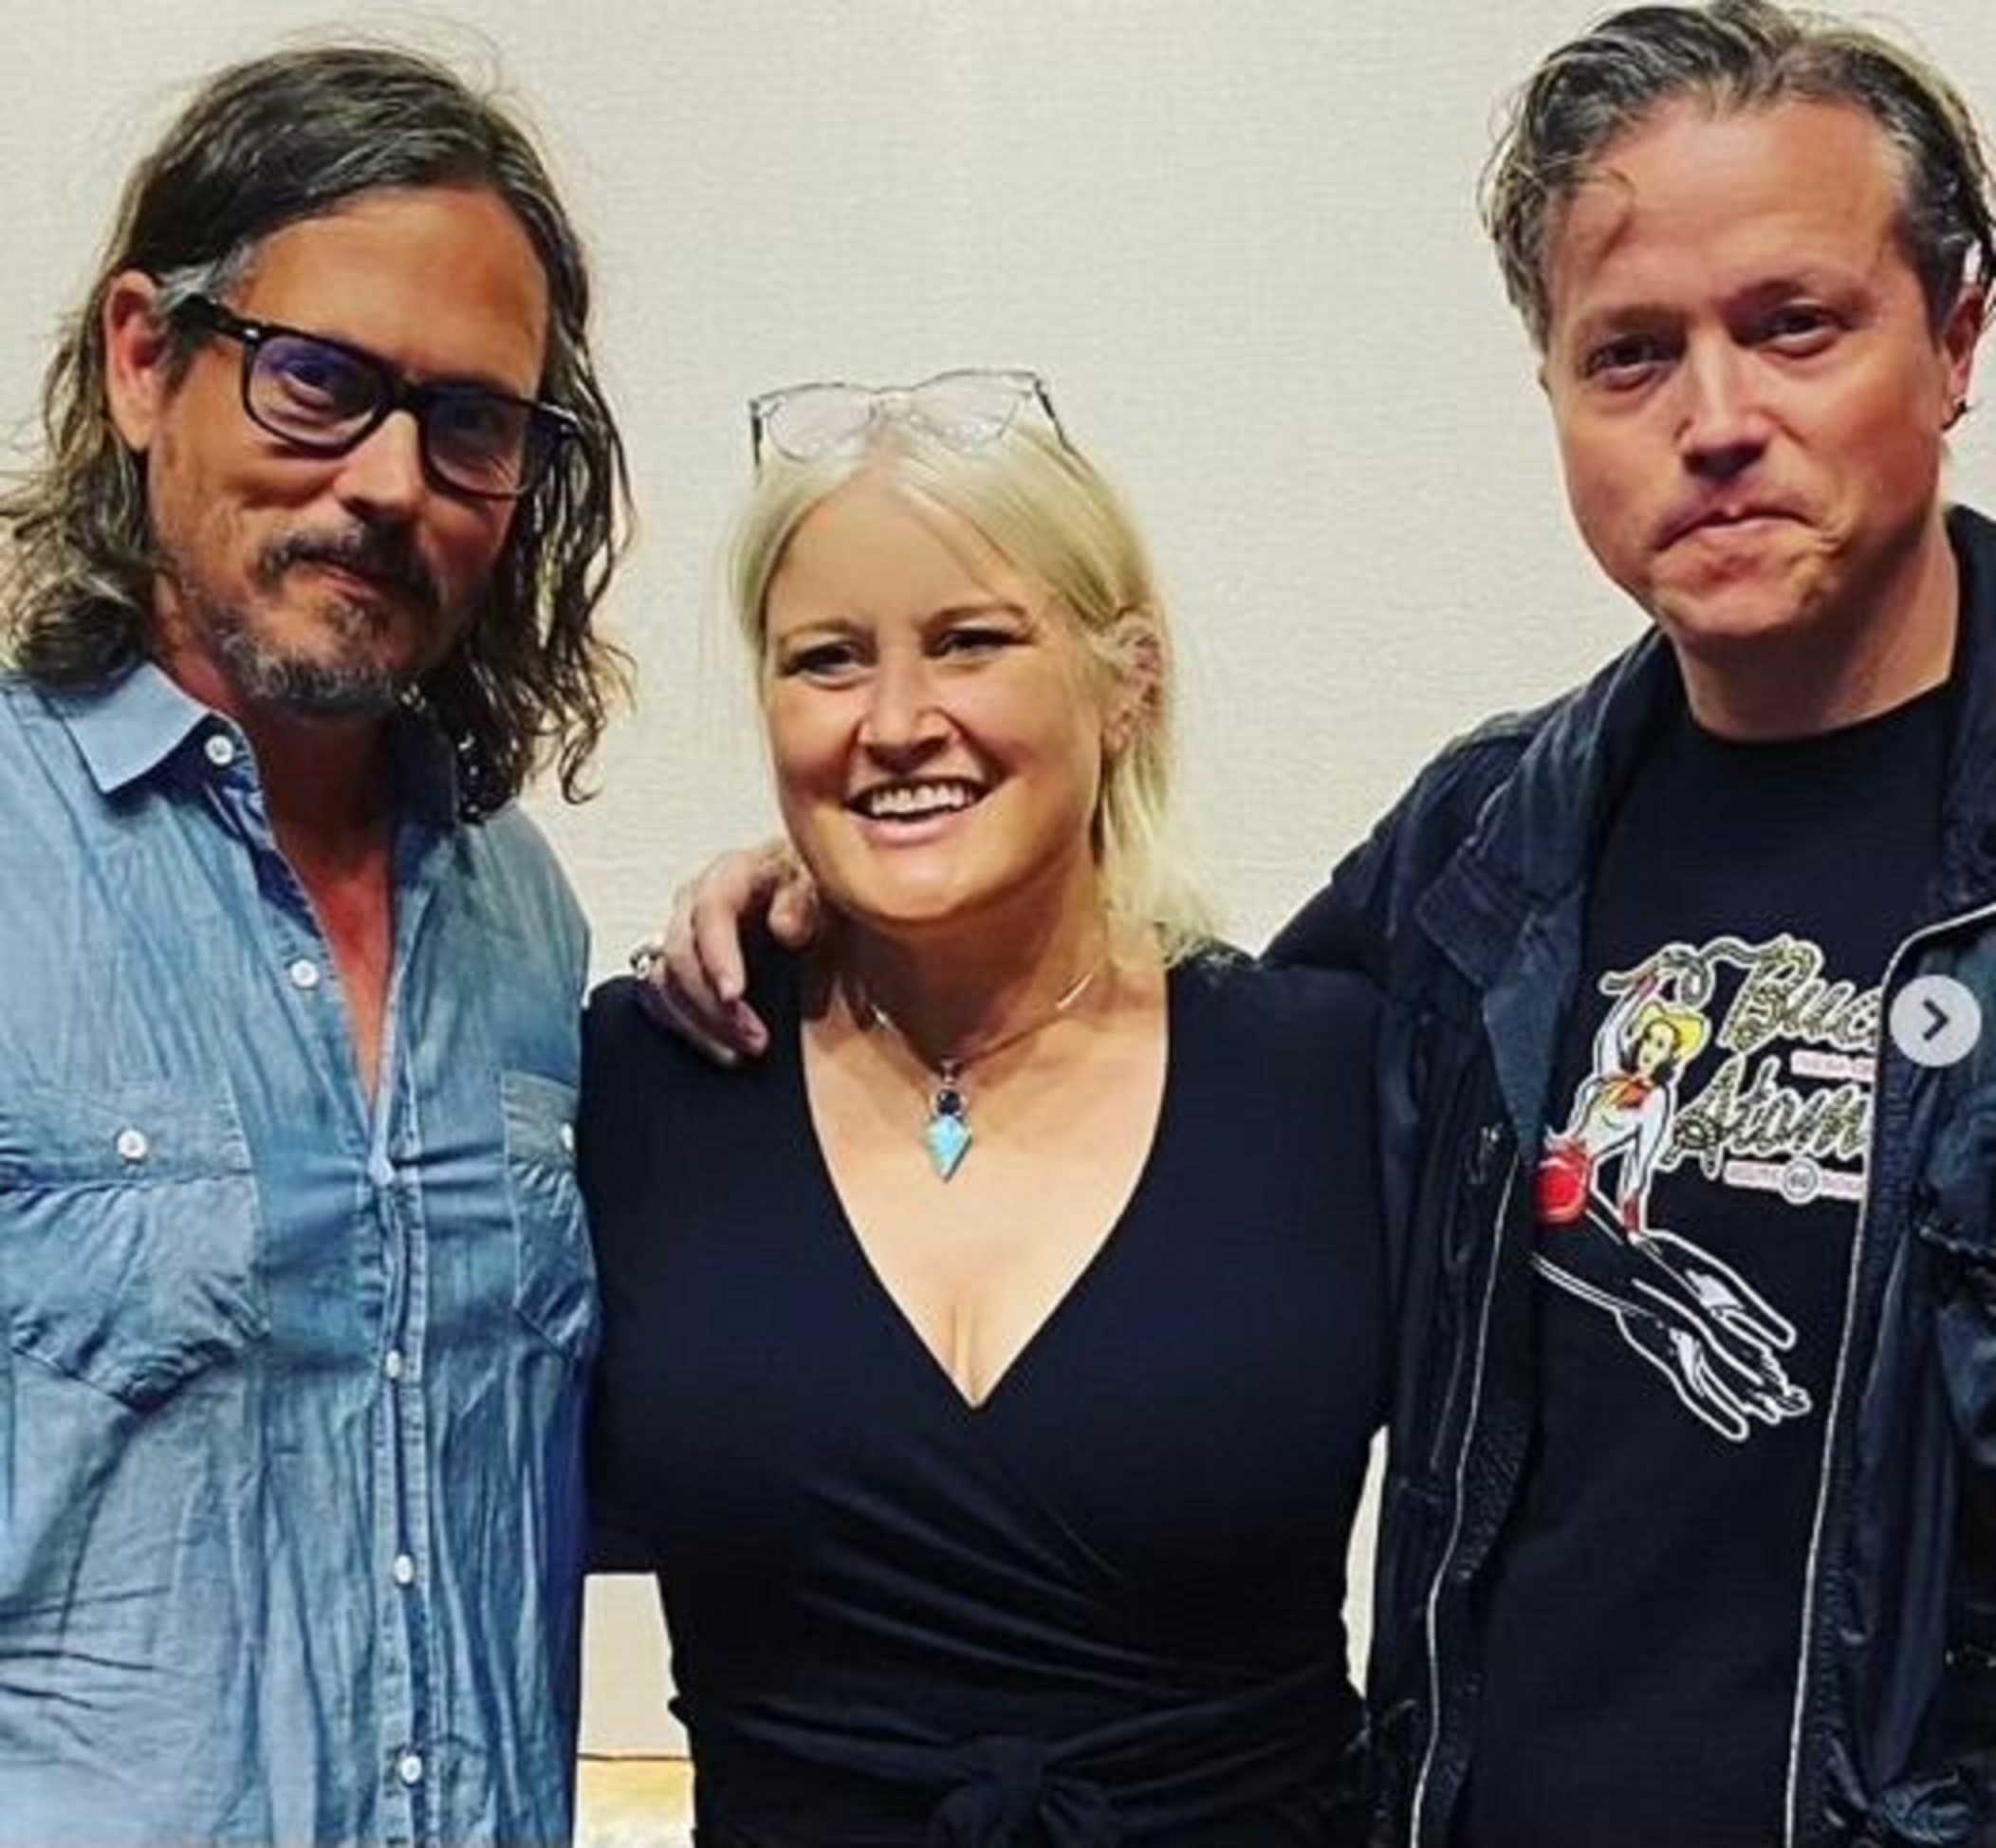 Paula Cole Shares Two New Songs Recorded With Jason Isbell & John Paul White